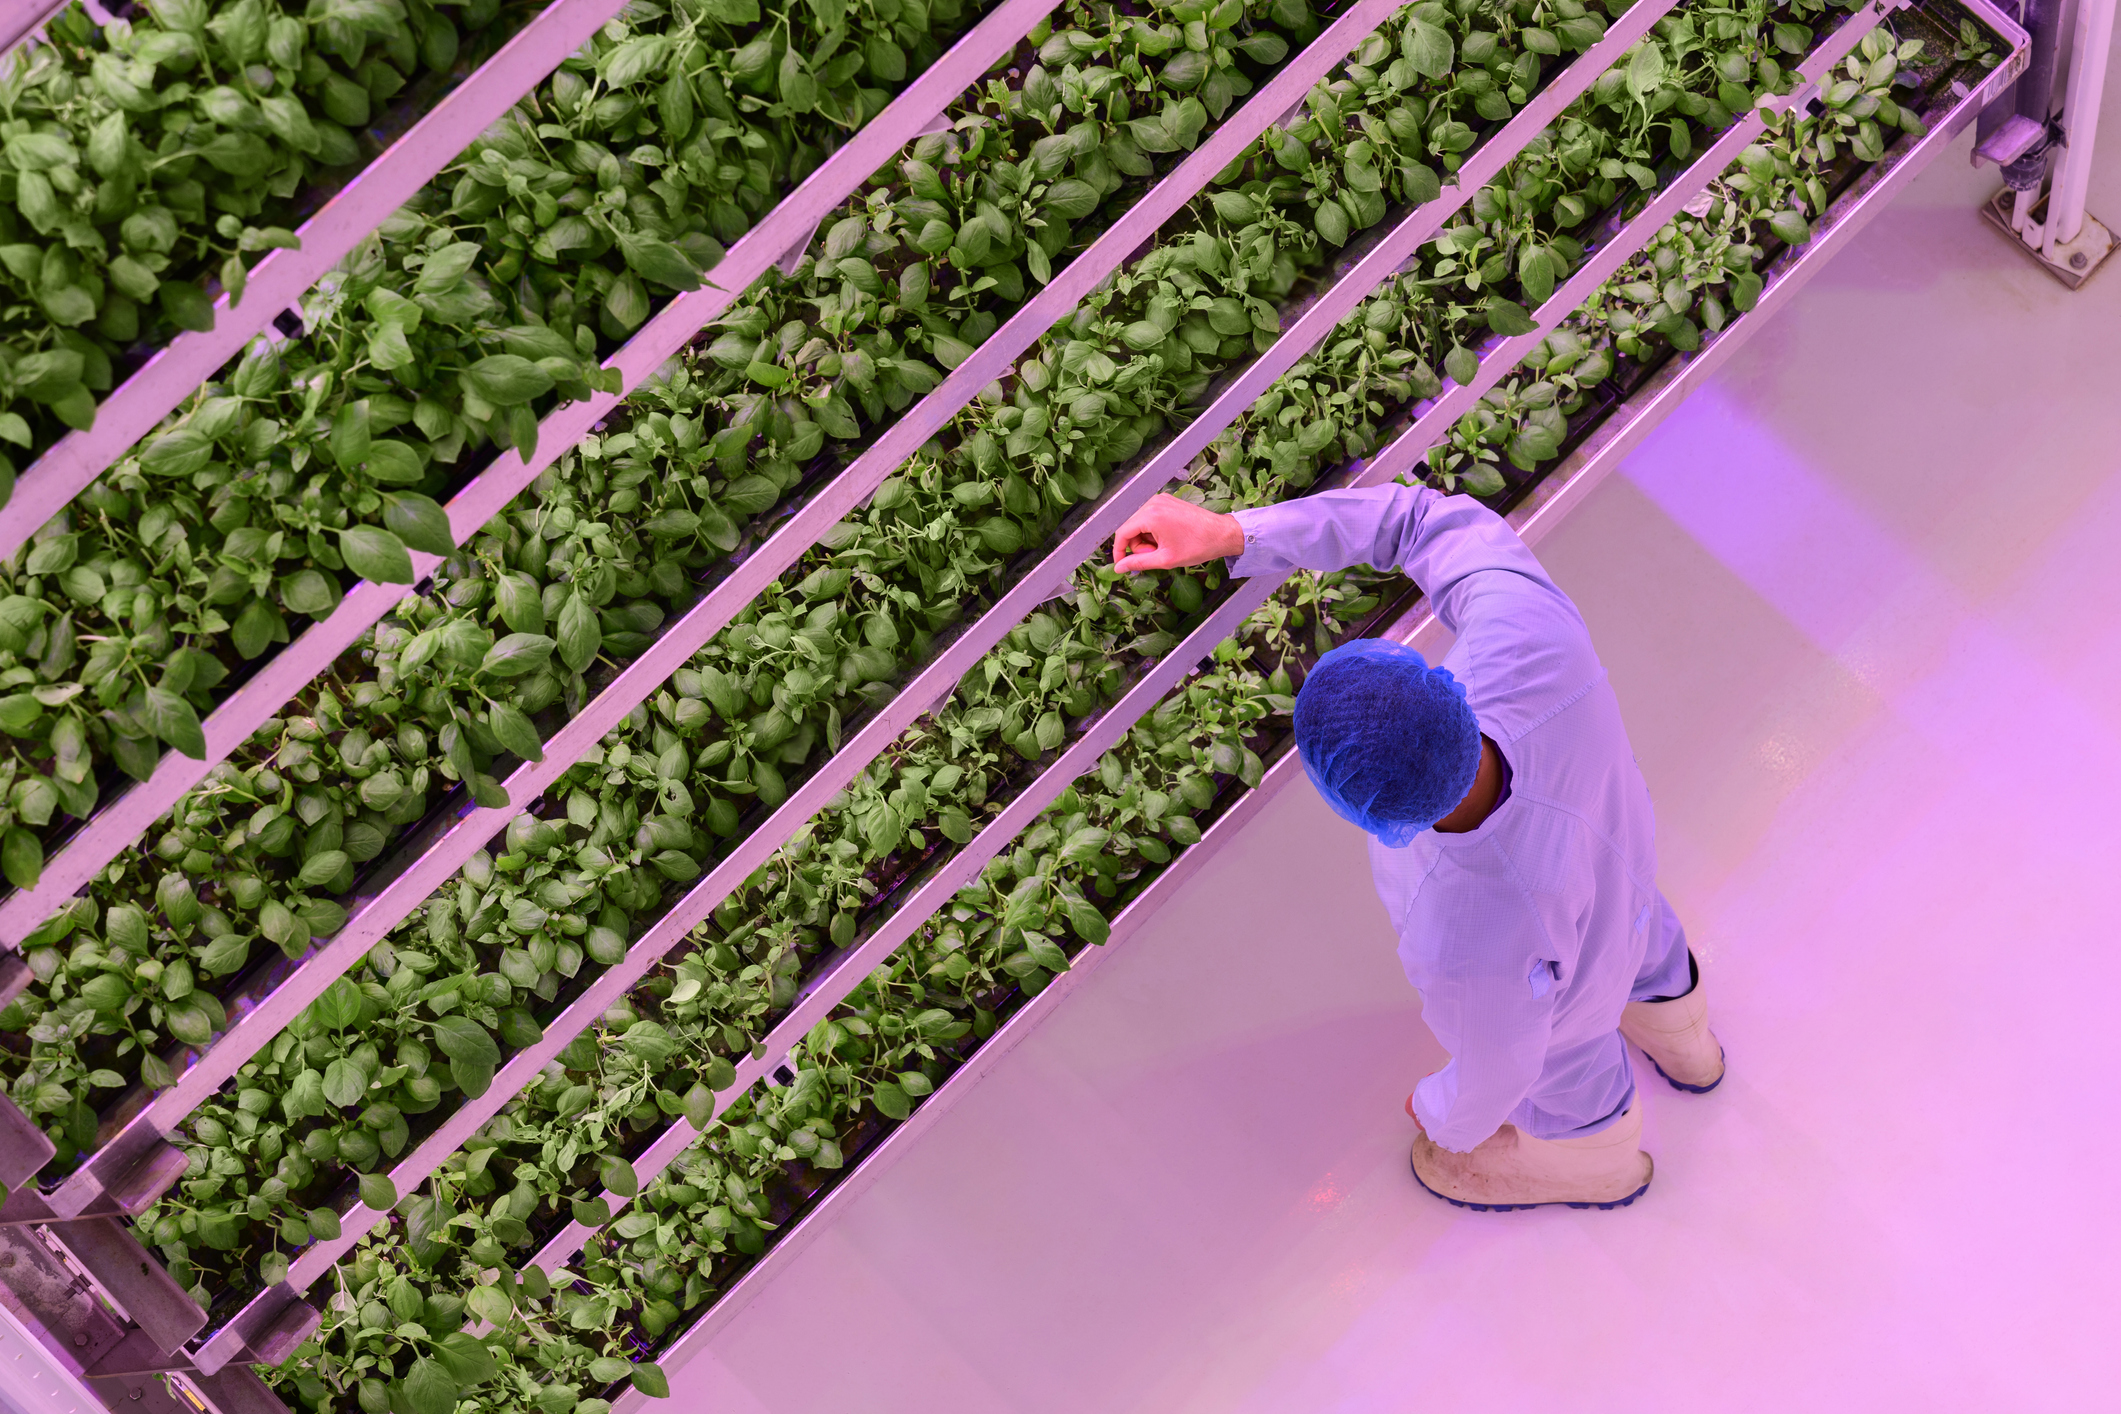 Farmer wearing boots white coat and hairnet checking plants in verticle indoor growing facility